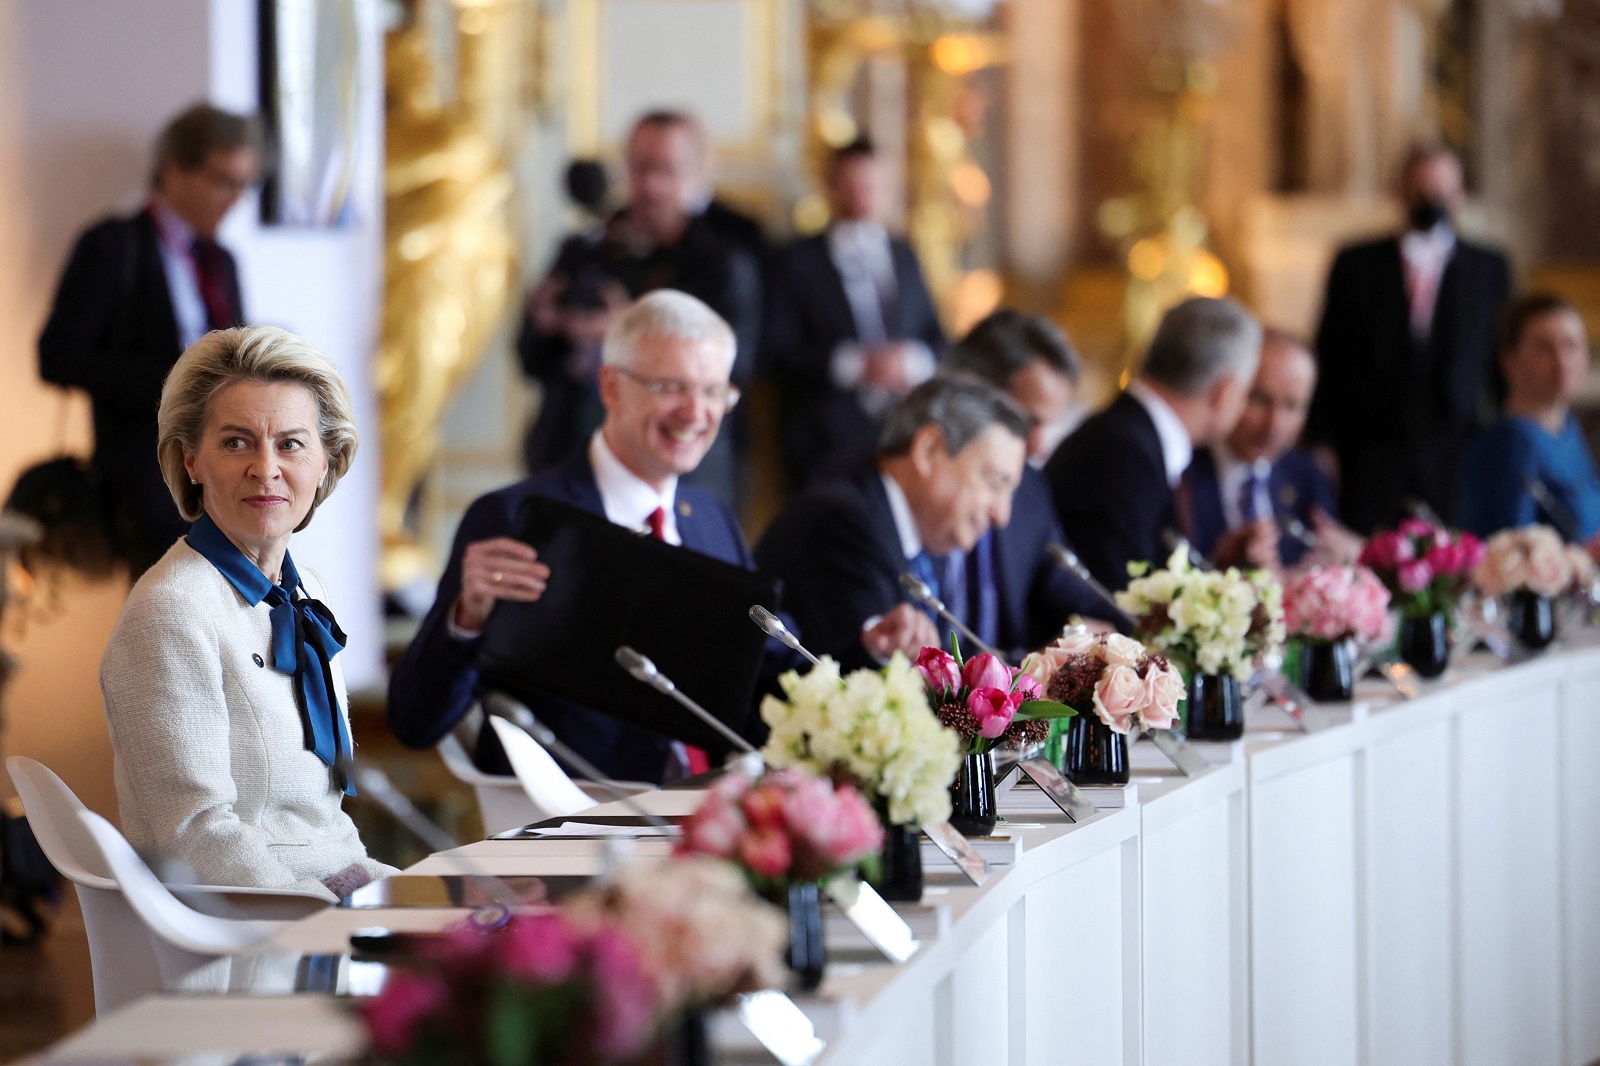 epa09816740 President of the European Commission Ursula von der Leyen attends an informal summit of EU leaders at the Chateau de Versailles (Versailles Palace) in Versailles, near Paris, France, 11 March 2022. EU heads of state and government met at the Versailles summit to discuss further sanctions against Russia for aggression against Ukraine, including sanctions on banks and individuals.  EPA/SARAH MEYSSONNIER / POOL  MAXPPP OUT